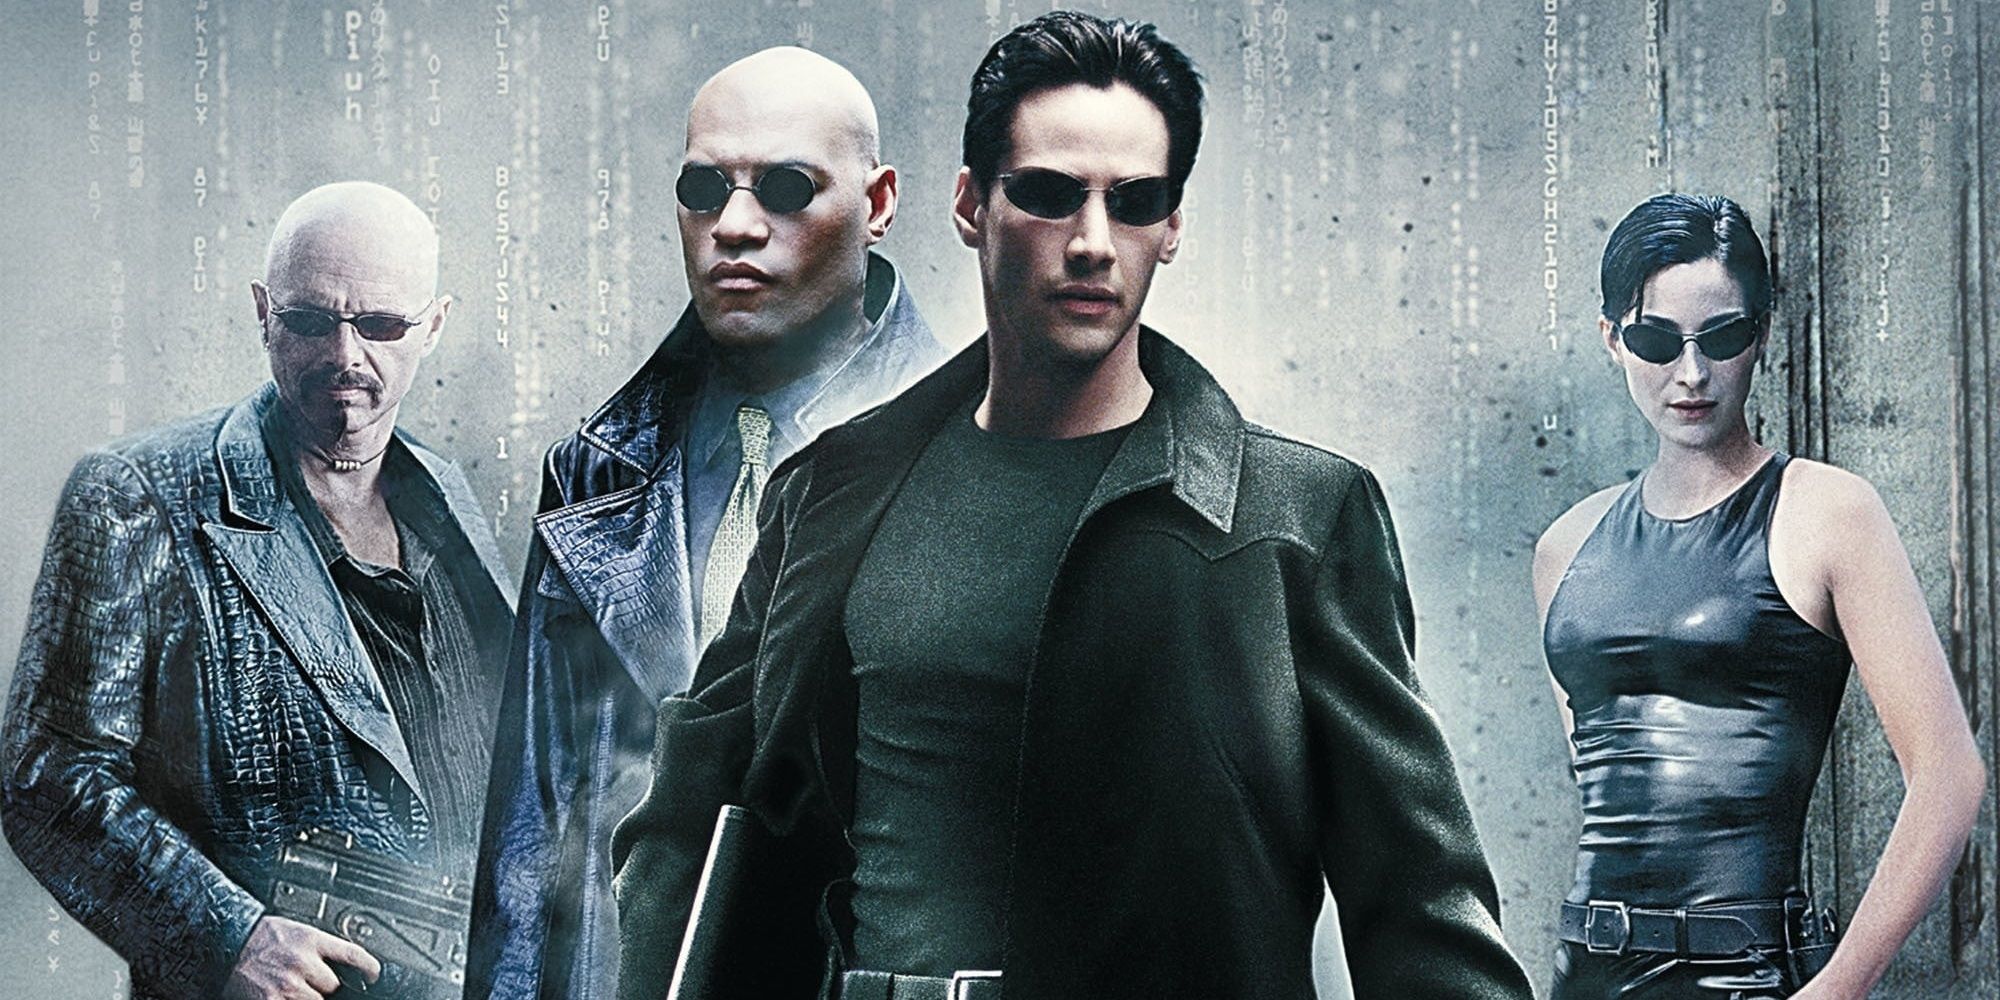 The main characters in The Matrix standing together